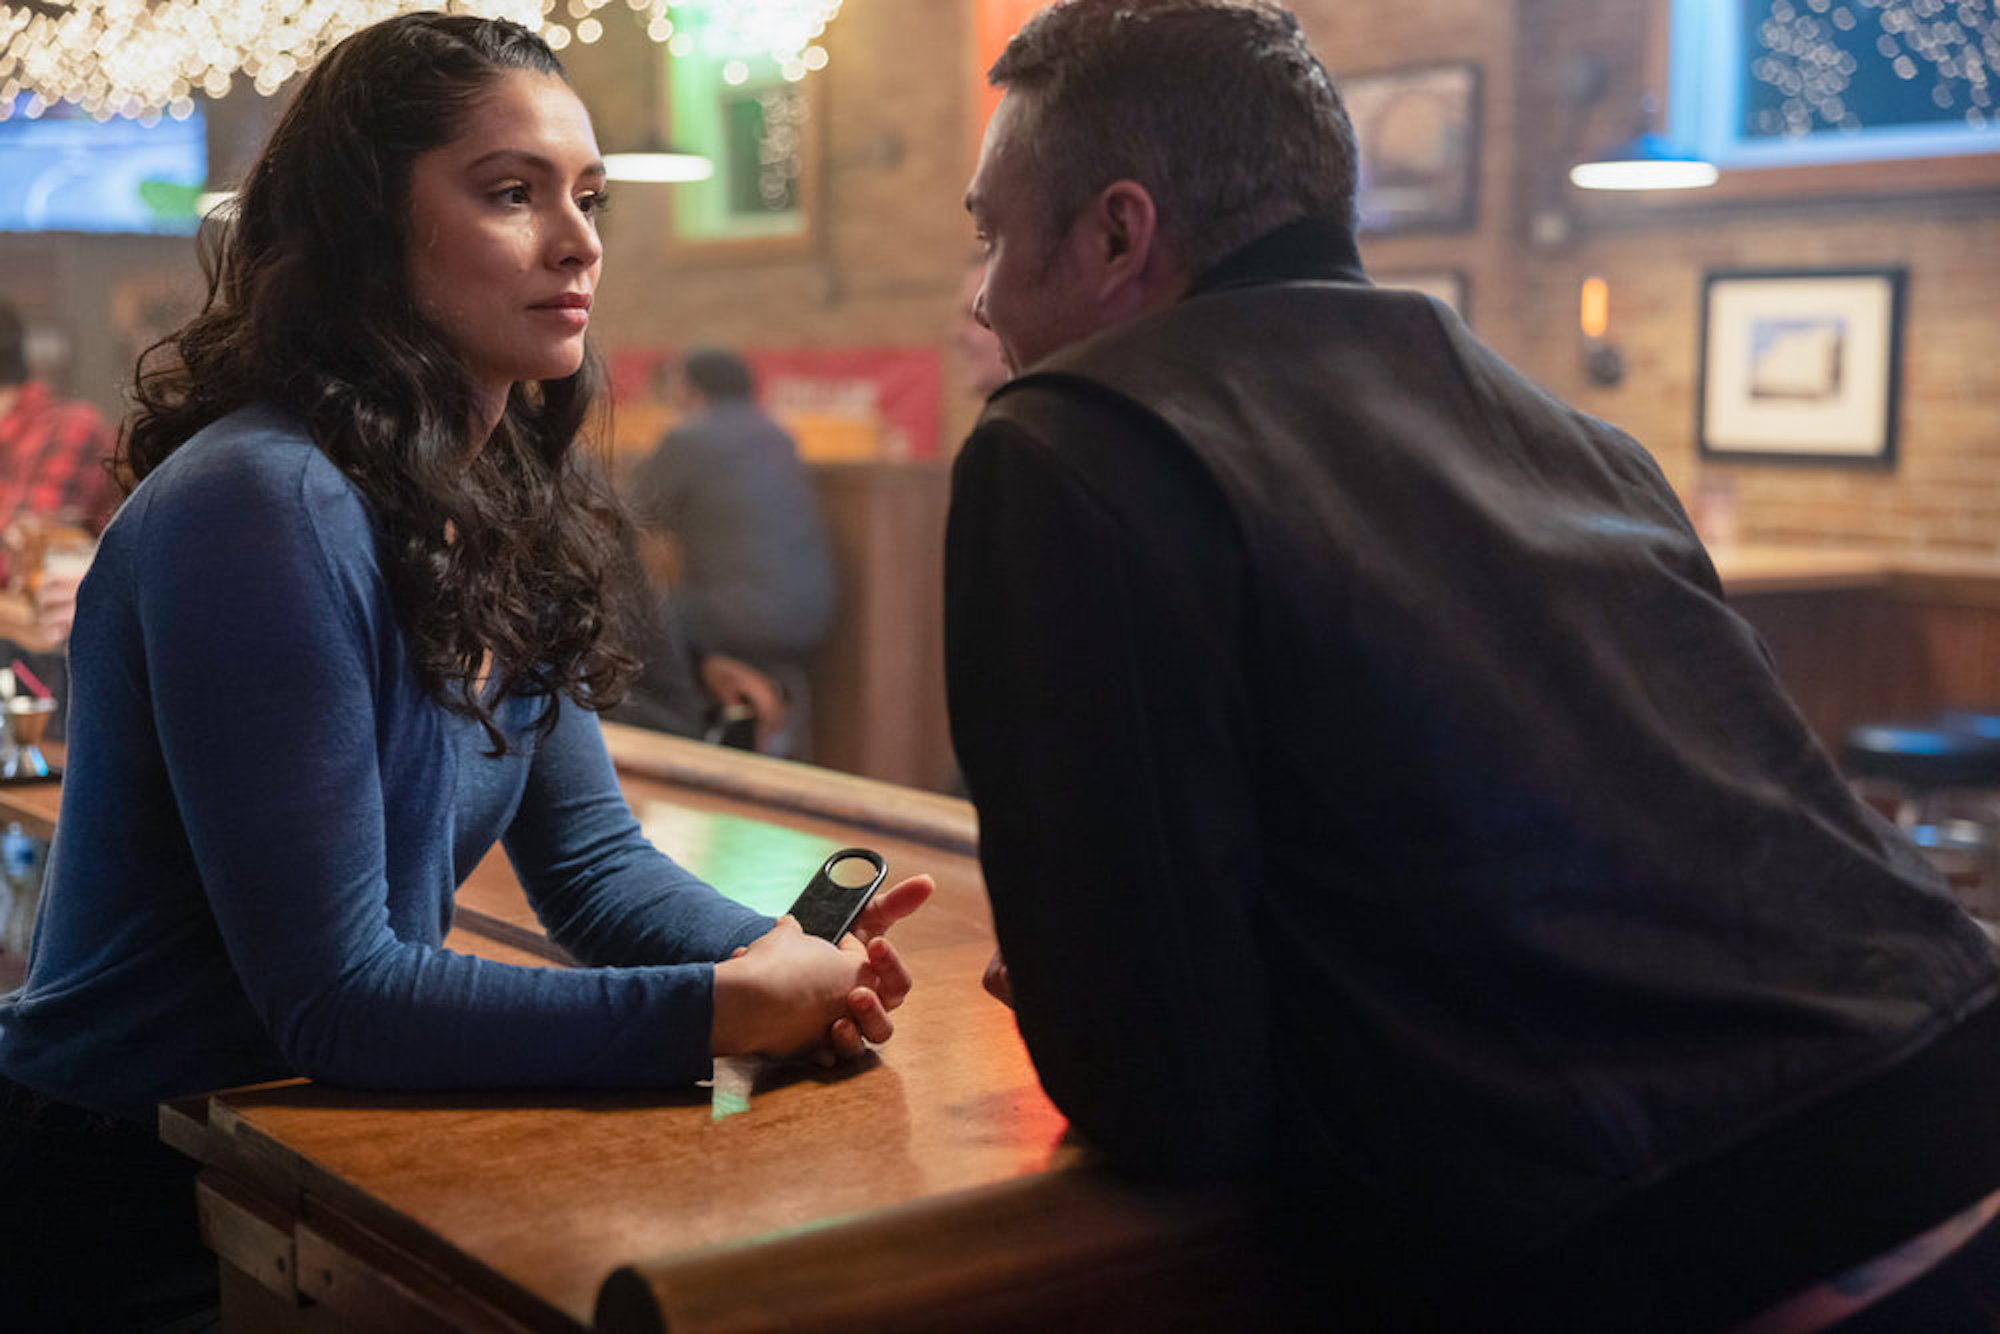 Miranda Rae Mayo as Stella Kidd and Taylor Kinney as Kelly Severide leaning over a table and talking intimately in 'Chicago Fire'